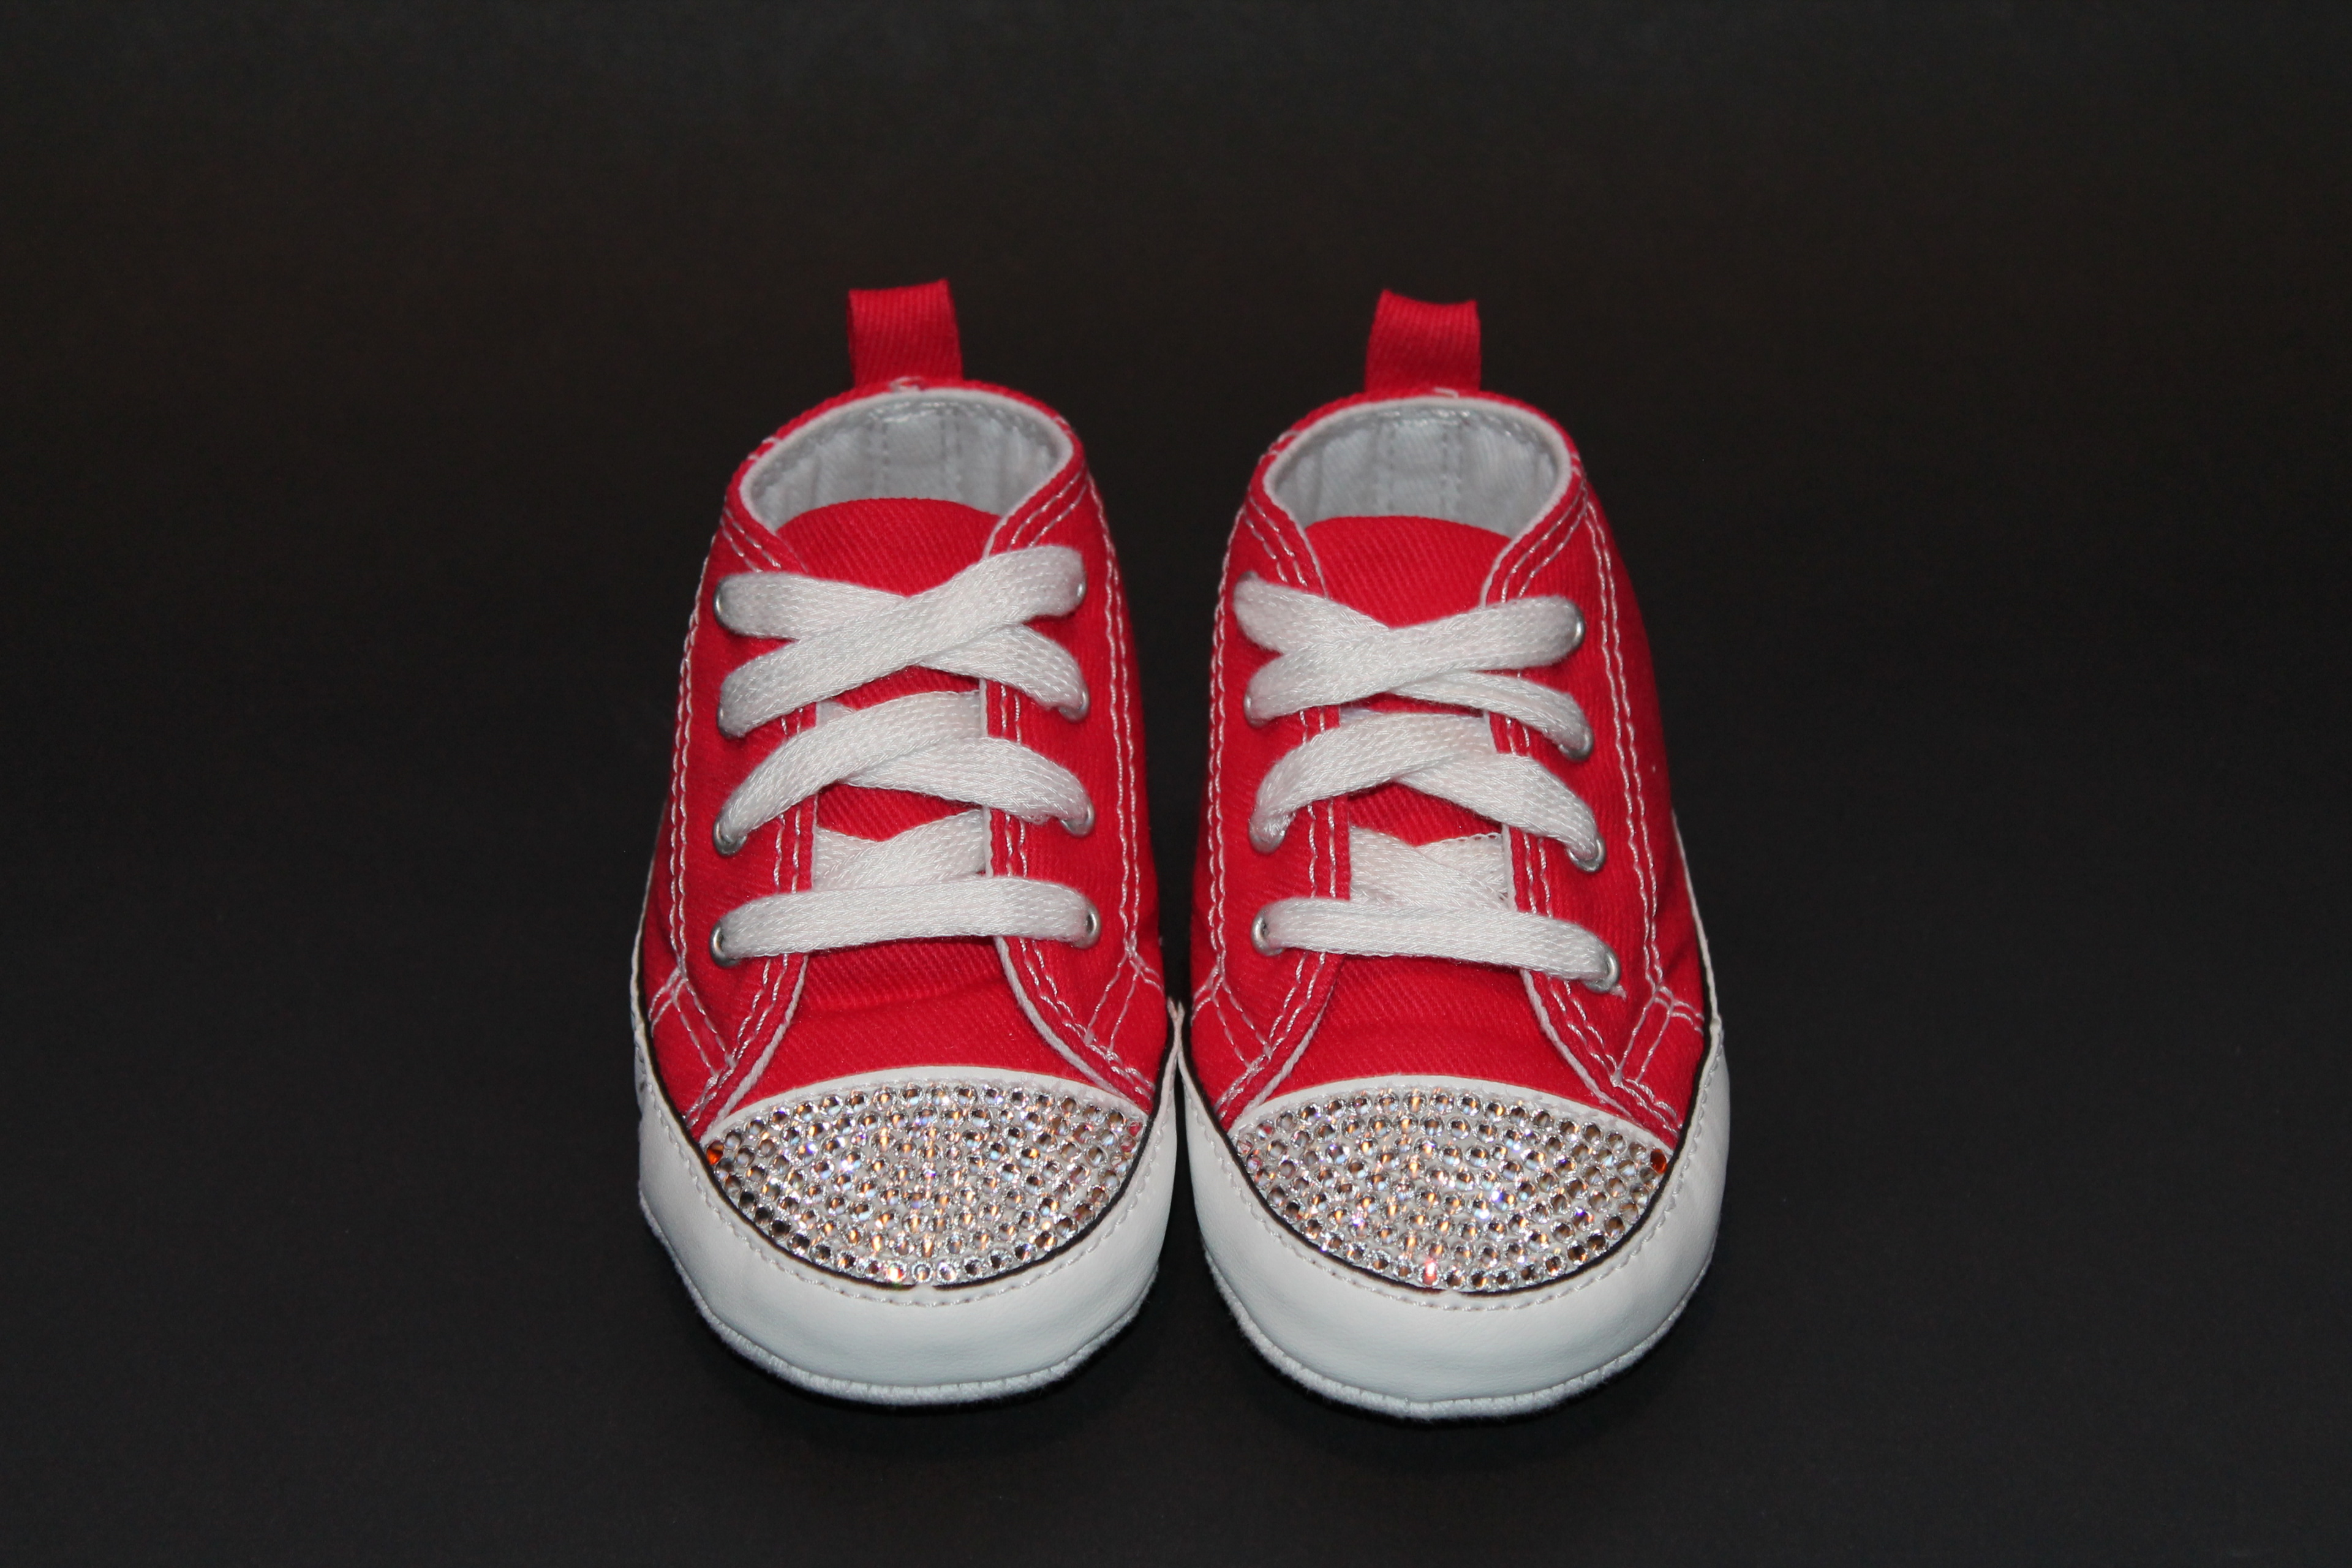 Funky Red Converse Crib Shoes